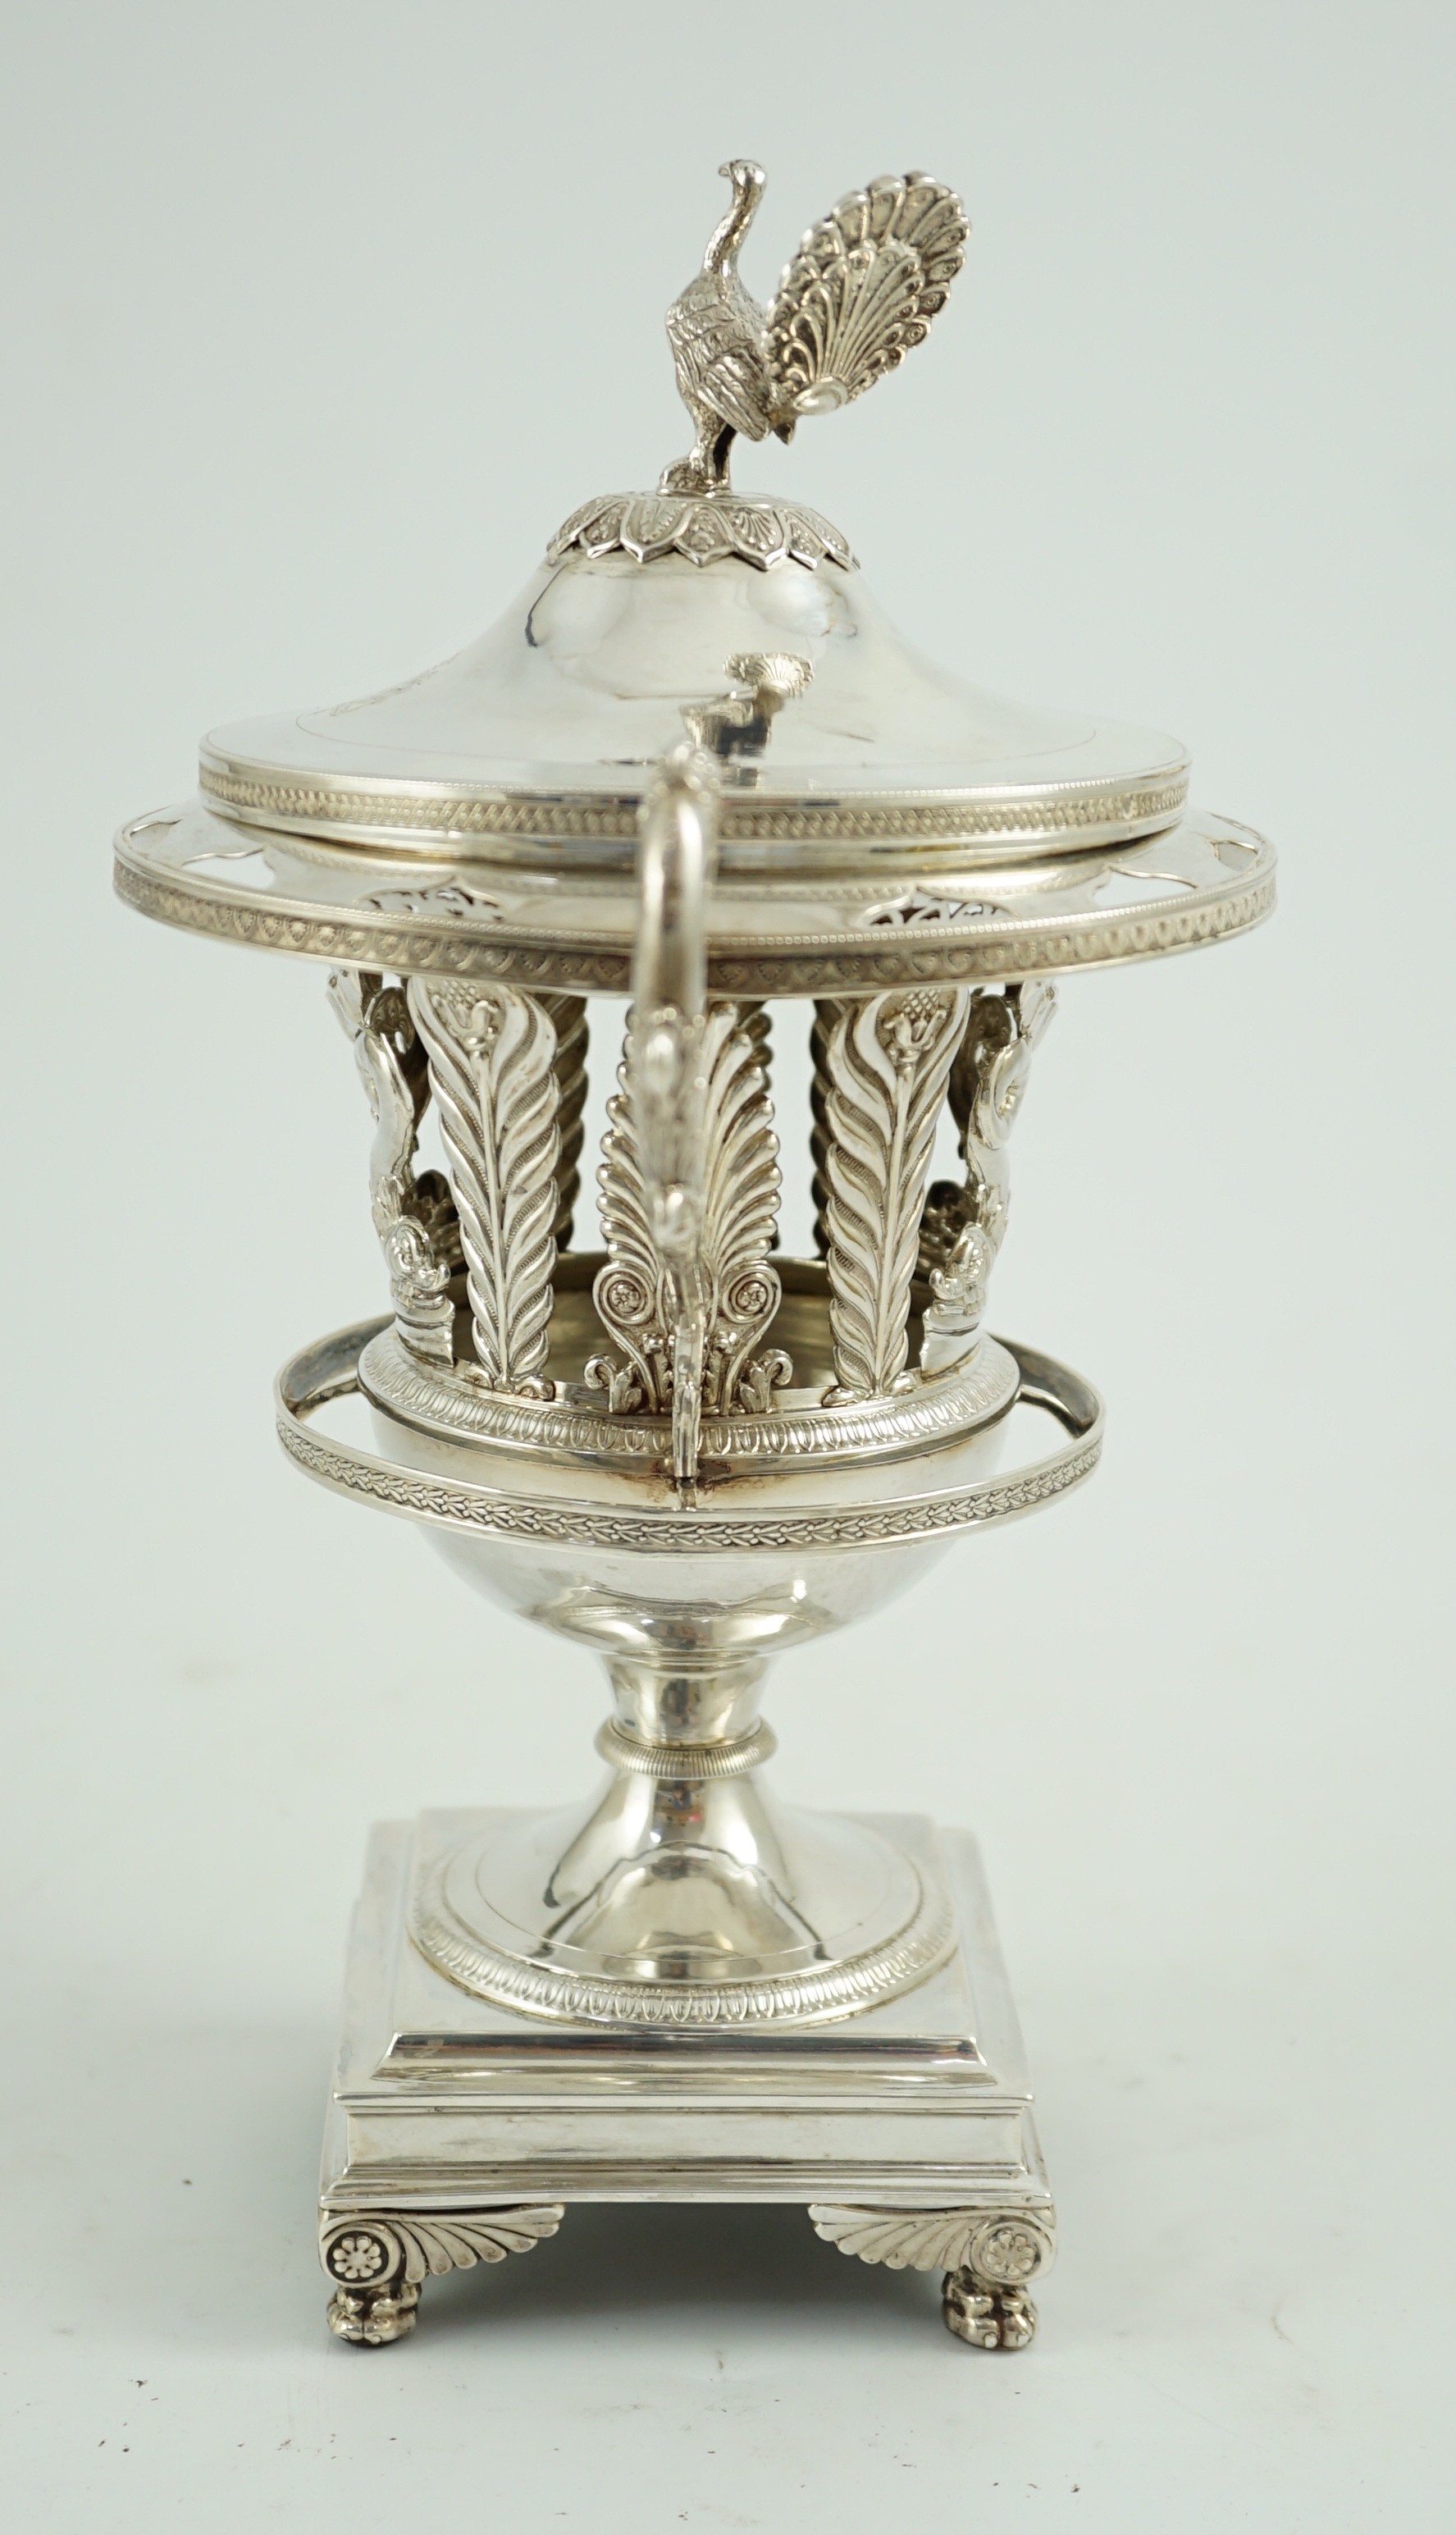 A 19th century ornate French pierced silver two handled urn shaped vase and cover